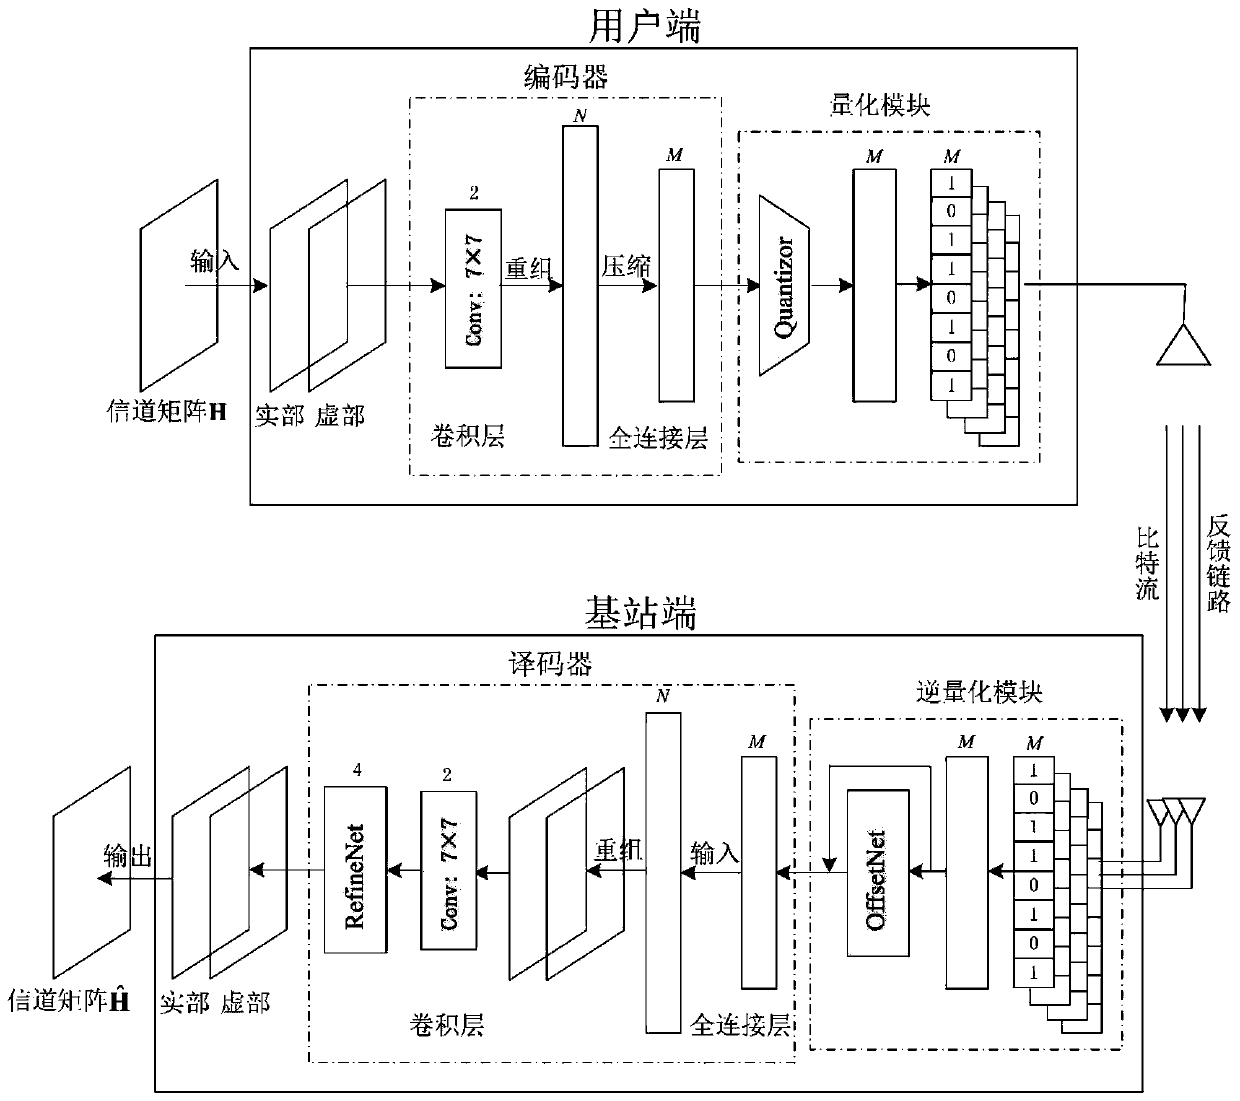 Quantization and inverse quantization method in large-scale MIMO channel state information feedback